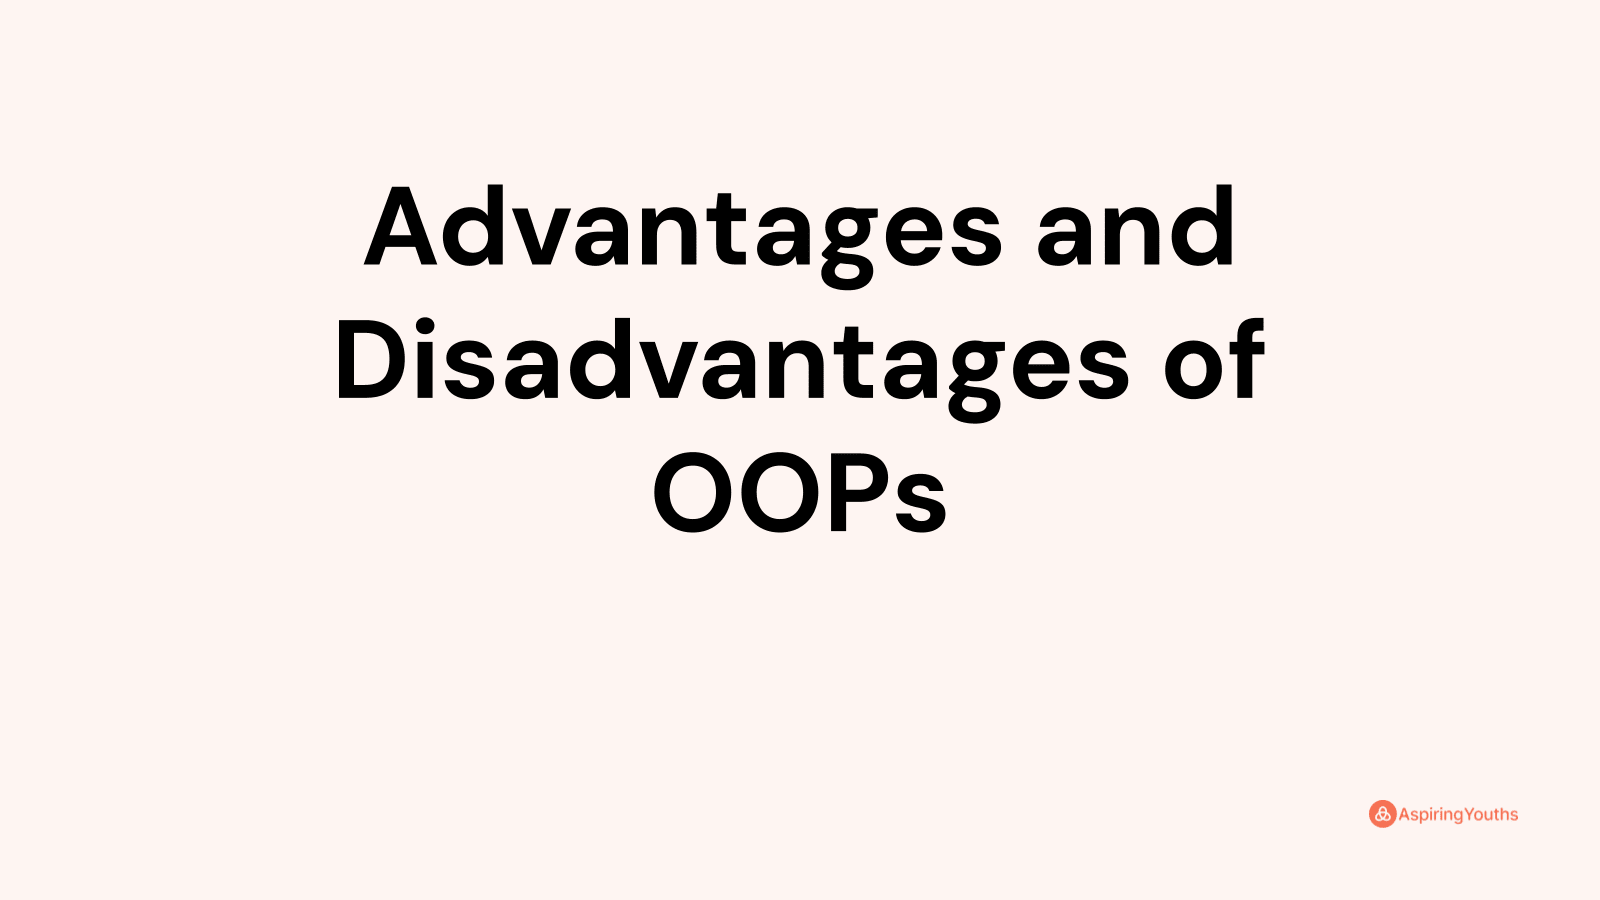 Advantages and disadvantages of OOPs